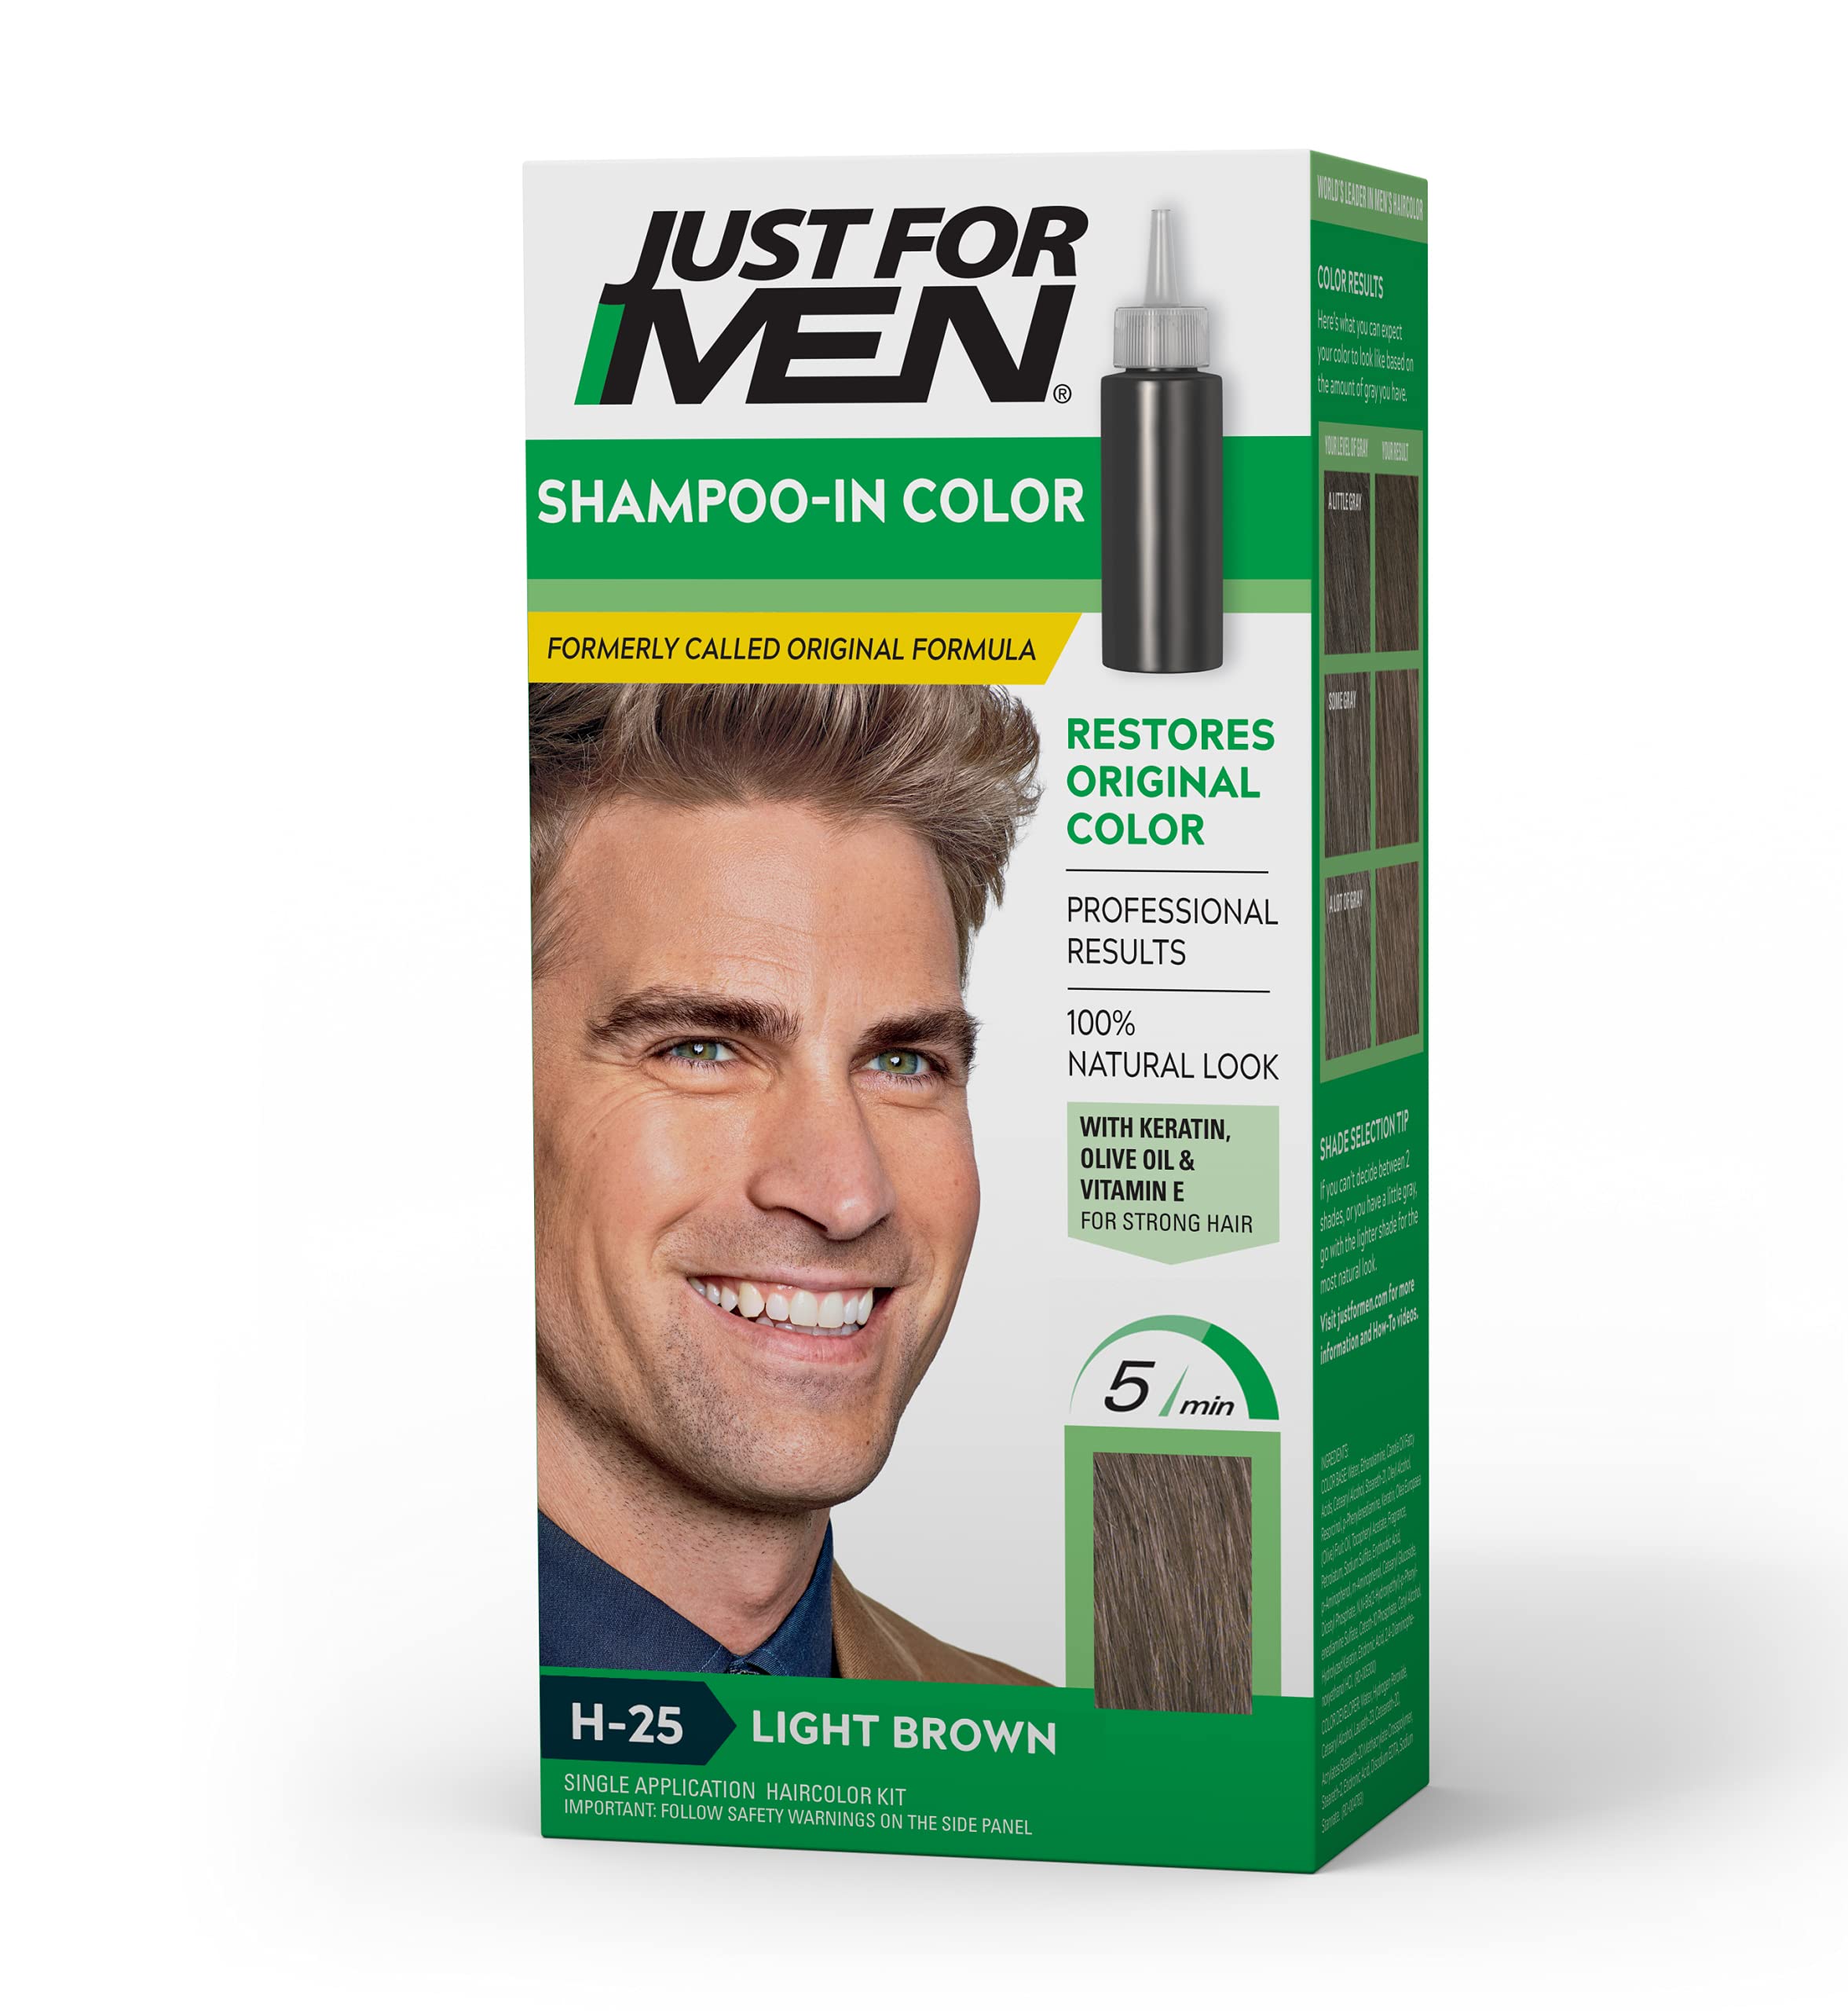 Just For Men Shampoo-In Color, Mens Hair Dye with Vitamin E for Stronger Hair - Light Brown, H-25, 1 Pack (Formerly Original Formula)